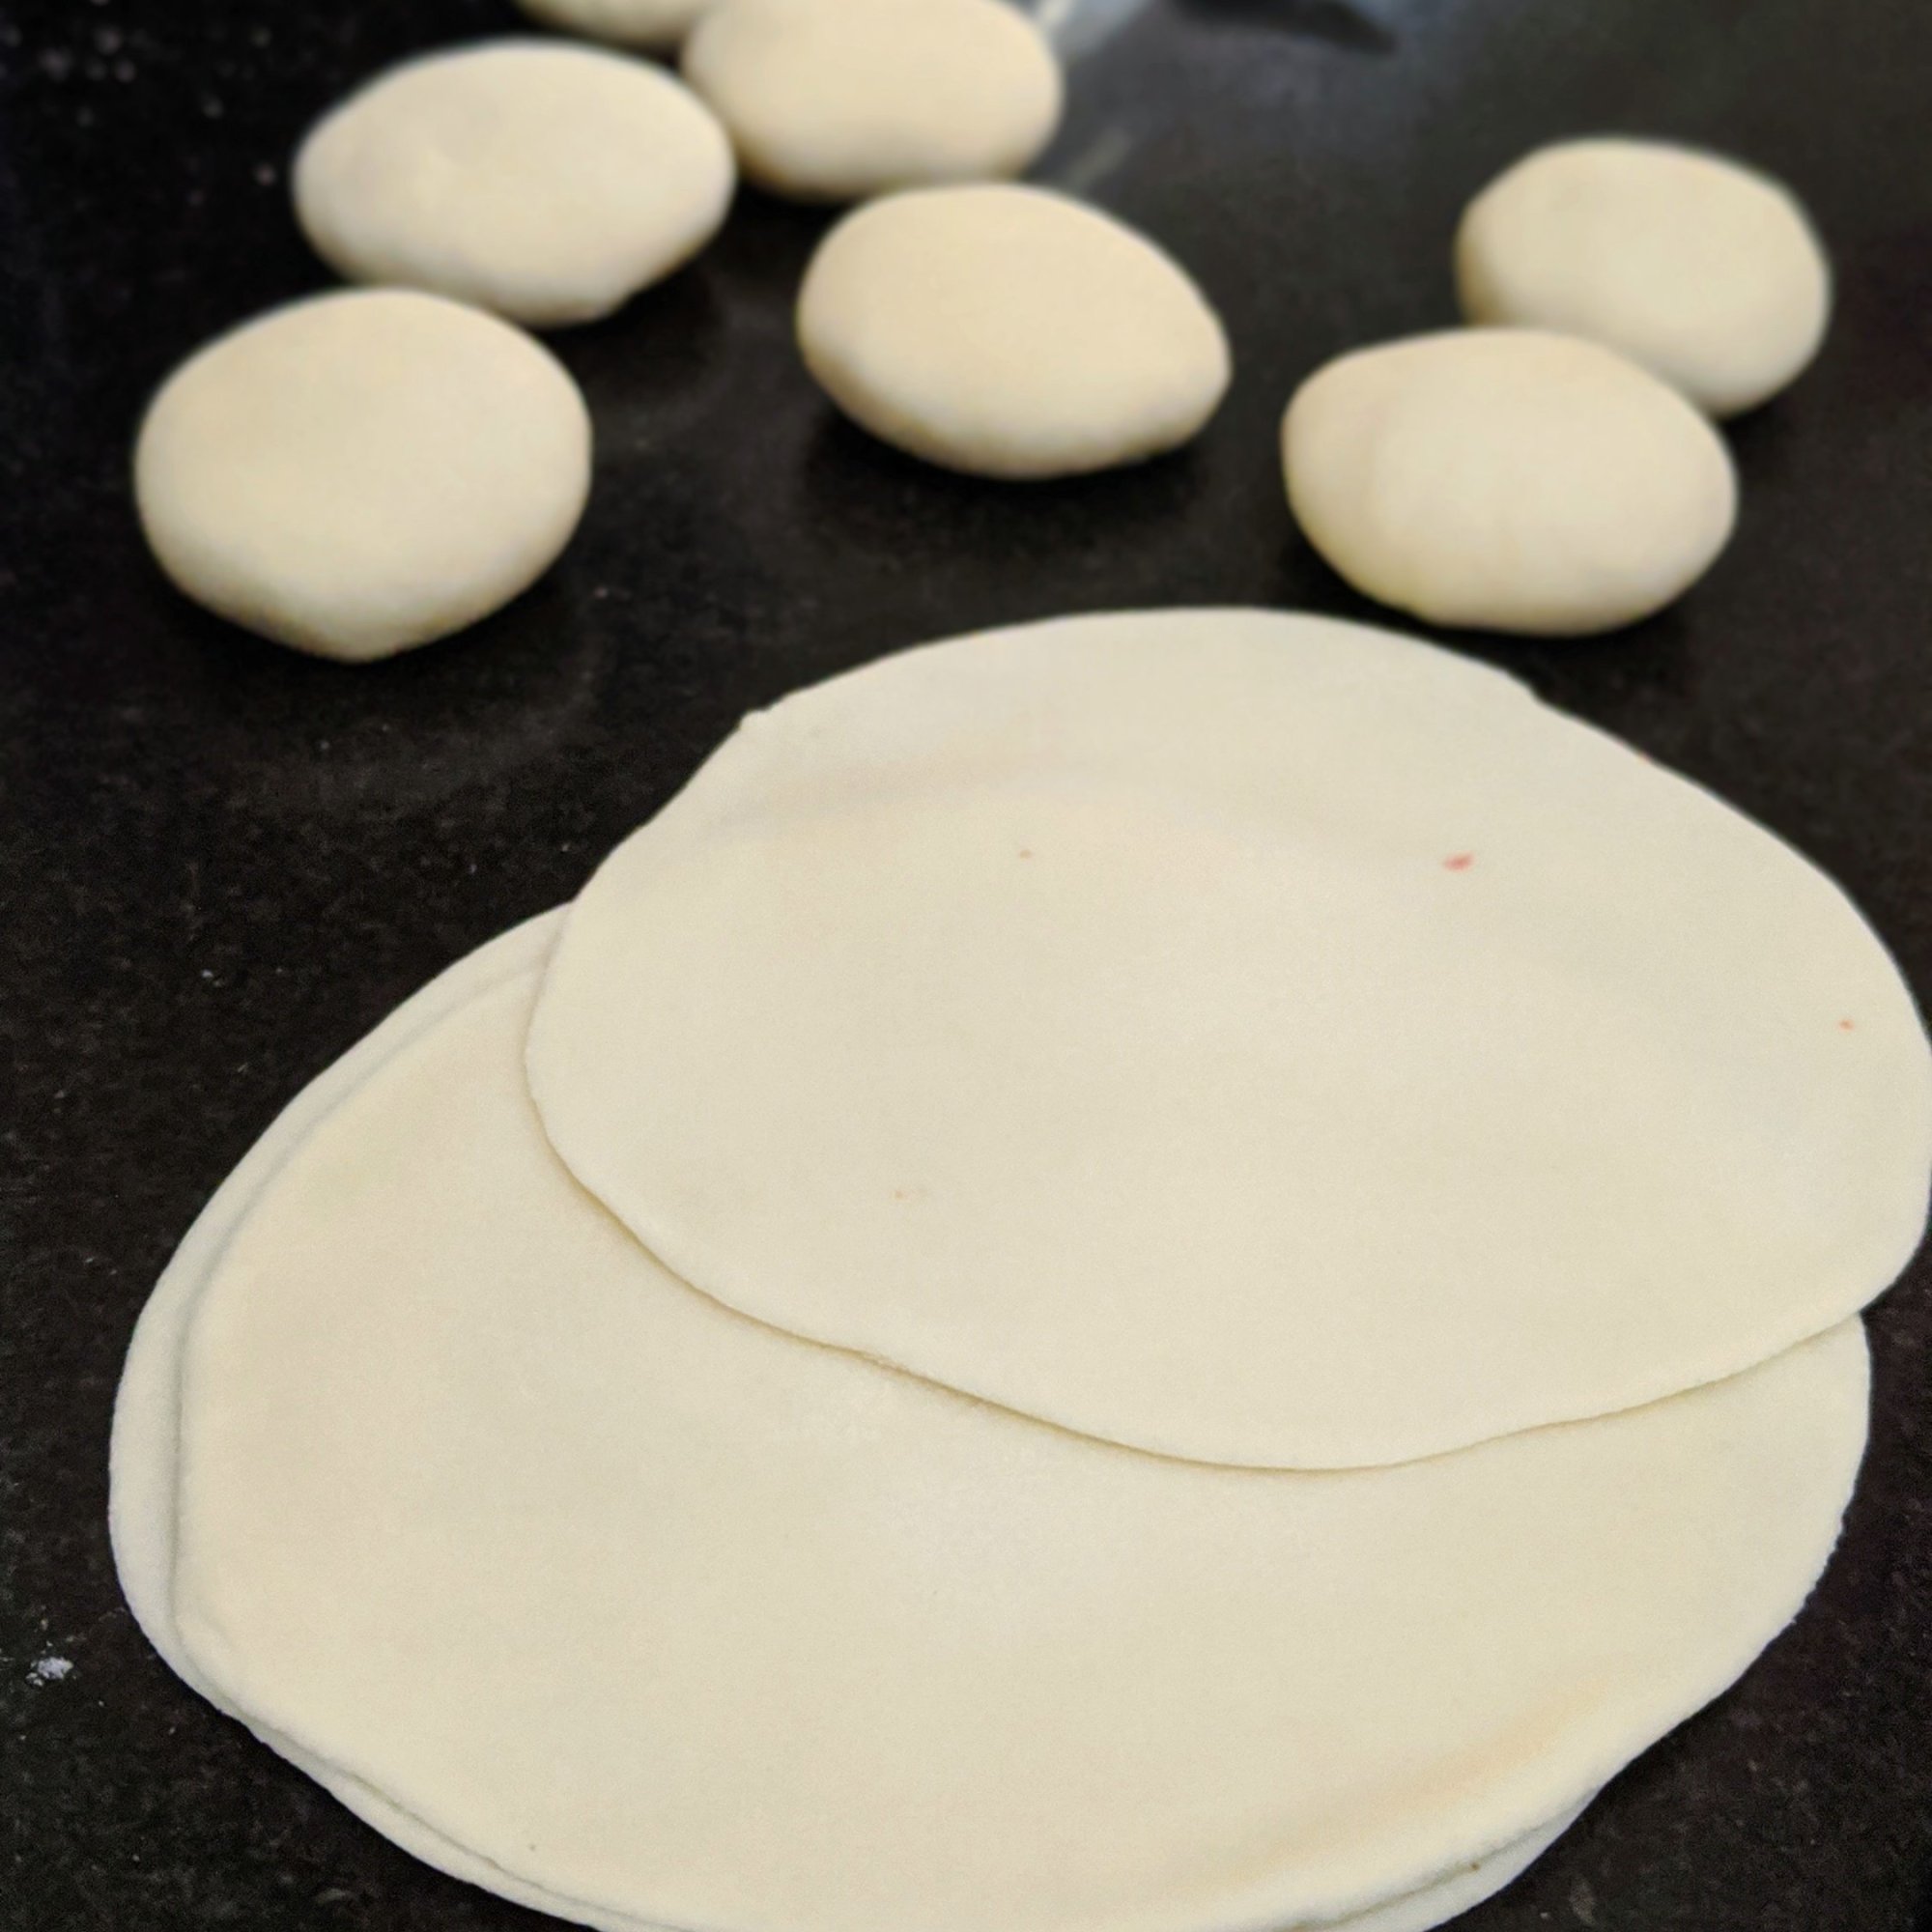 Roll them into 4 inch diameter circle, using a rolling pin.